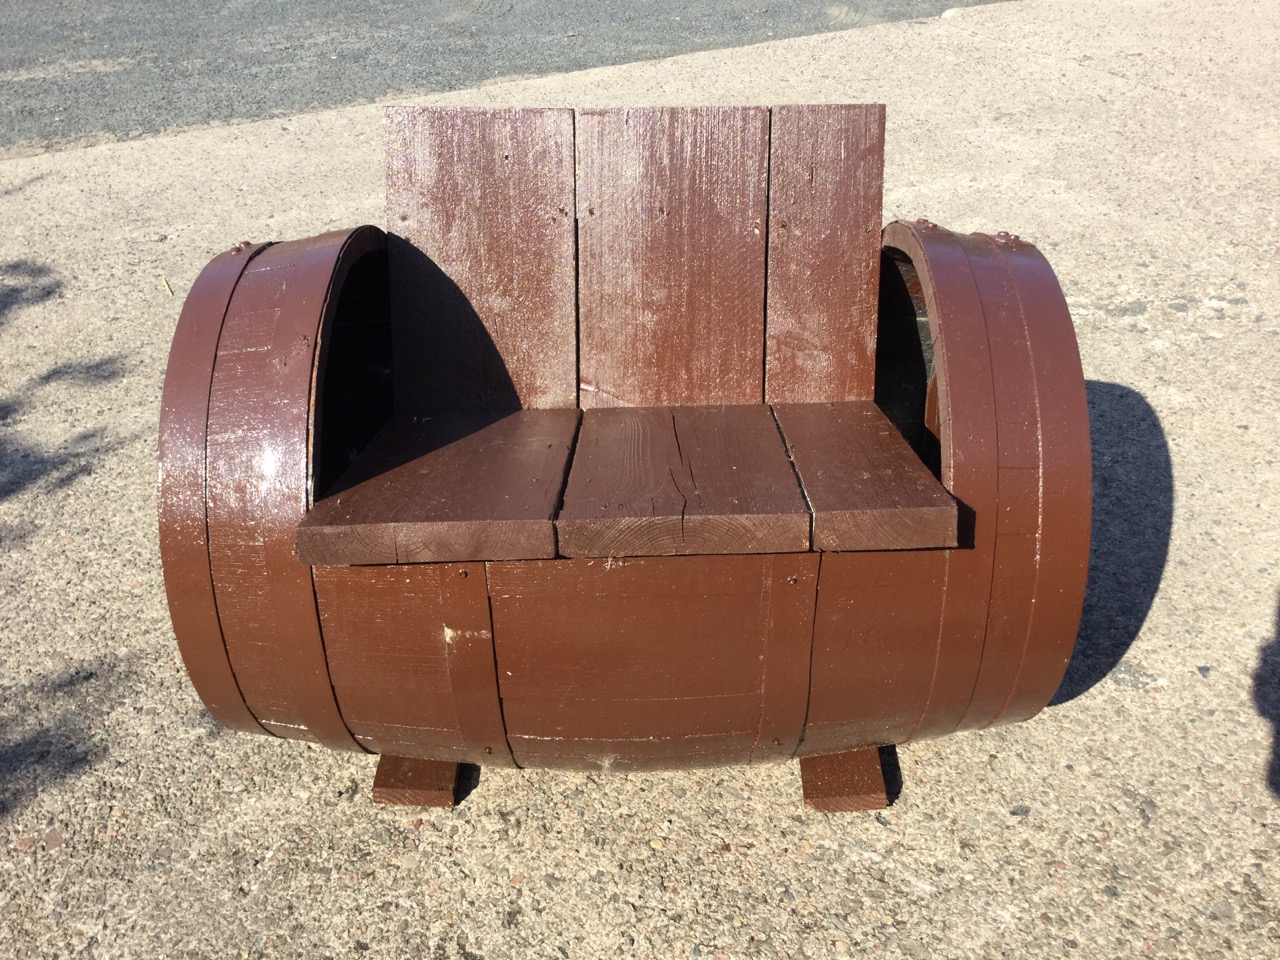 A pair of painted garden seats formed out of old barrels, with boarded backs and seats cut into - Image 2 of 3